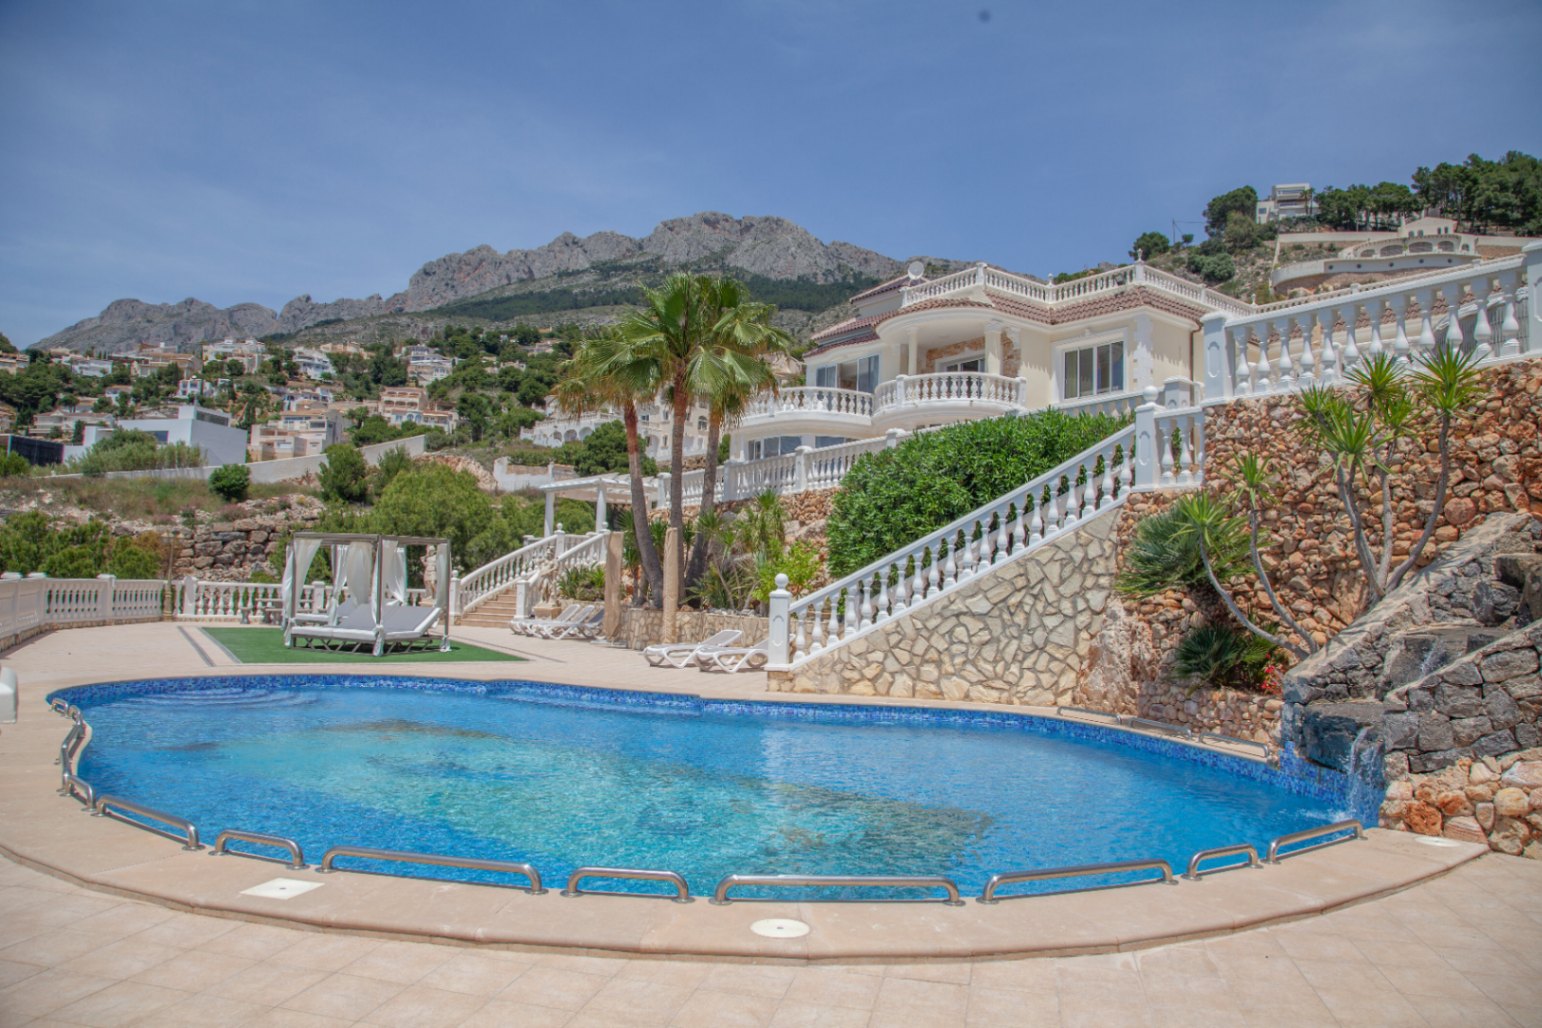 For sale an exquisite complex consisting of two majestic villas in the picturesque town of Altea, an oasis of tranquility on the resplendent Costa Blanca, just 60 km from Alicante airport. The main villa, with an imposing area of 749 m2, stands as a symbol of elegance and comfort. Upon entering, there is a lobby that leads to a living room luxuriously furnished with luxury furniture, adorned with gold-plated elements that reflect a refined and exclusive taste. The meticulously designed UK kitchen and dining set are true masterpieces, while the office offers a private and elegant workspace. On the ground floor, a guest bedroom with a private bathroom and a games room complete this leisure and relaxation area. On the first floor, a welcoming hallway leads to a second living room, creating an atmosphere of serenity and comfort. The master bedroom, a dream suite, features an exquisitely appointed bathroom with china items and a walk-in closet with private bathroom. Additionally, 3 additional bedrooms with en-suite bathrooms provide an intimate space for family and guests. The crown jewel of this property is its large 199 m2 terrace, with panoramic views of the Mediterranean Sea and creates a perfect environment for outdoor entertaining and relaxing moments. On an expansive 6,173 m2 plot, there is an impressive swimming pool and solarium, surrounded by gardens that offer an oasis of tranquility and privacy. In addition, a 537 m2 guest villa, currently under construction, which has 5 bedrooms and 6 bathrooms, a spa area with swimming pool and 1 gym, completes this enclave of opulence and distinction.